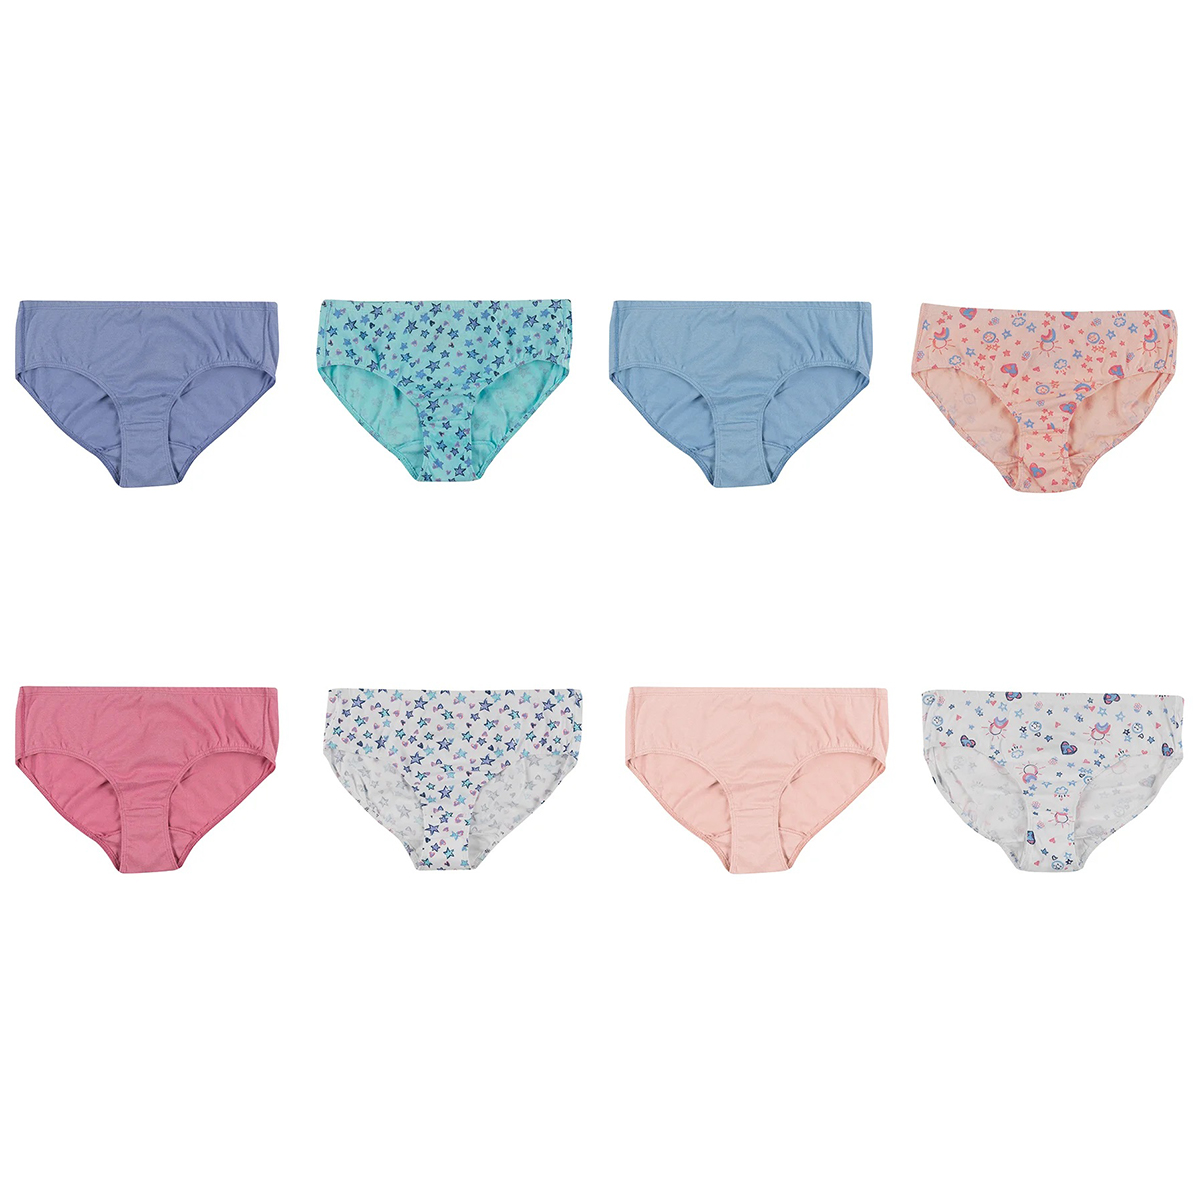 Hanes Ultimate Girls' Pure Comfort Organic Cotton Brief, Assorted 8-Pack